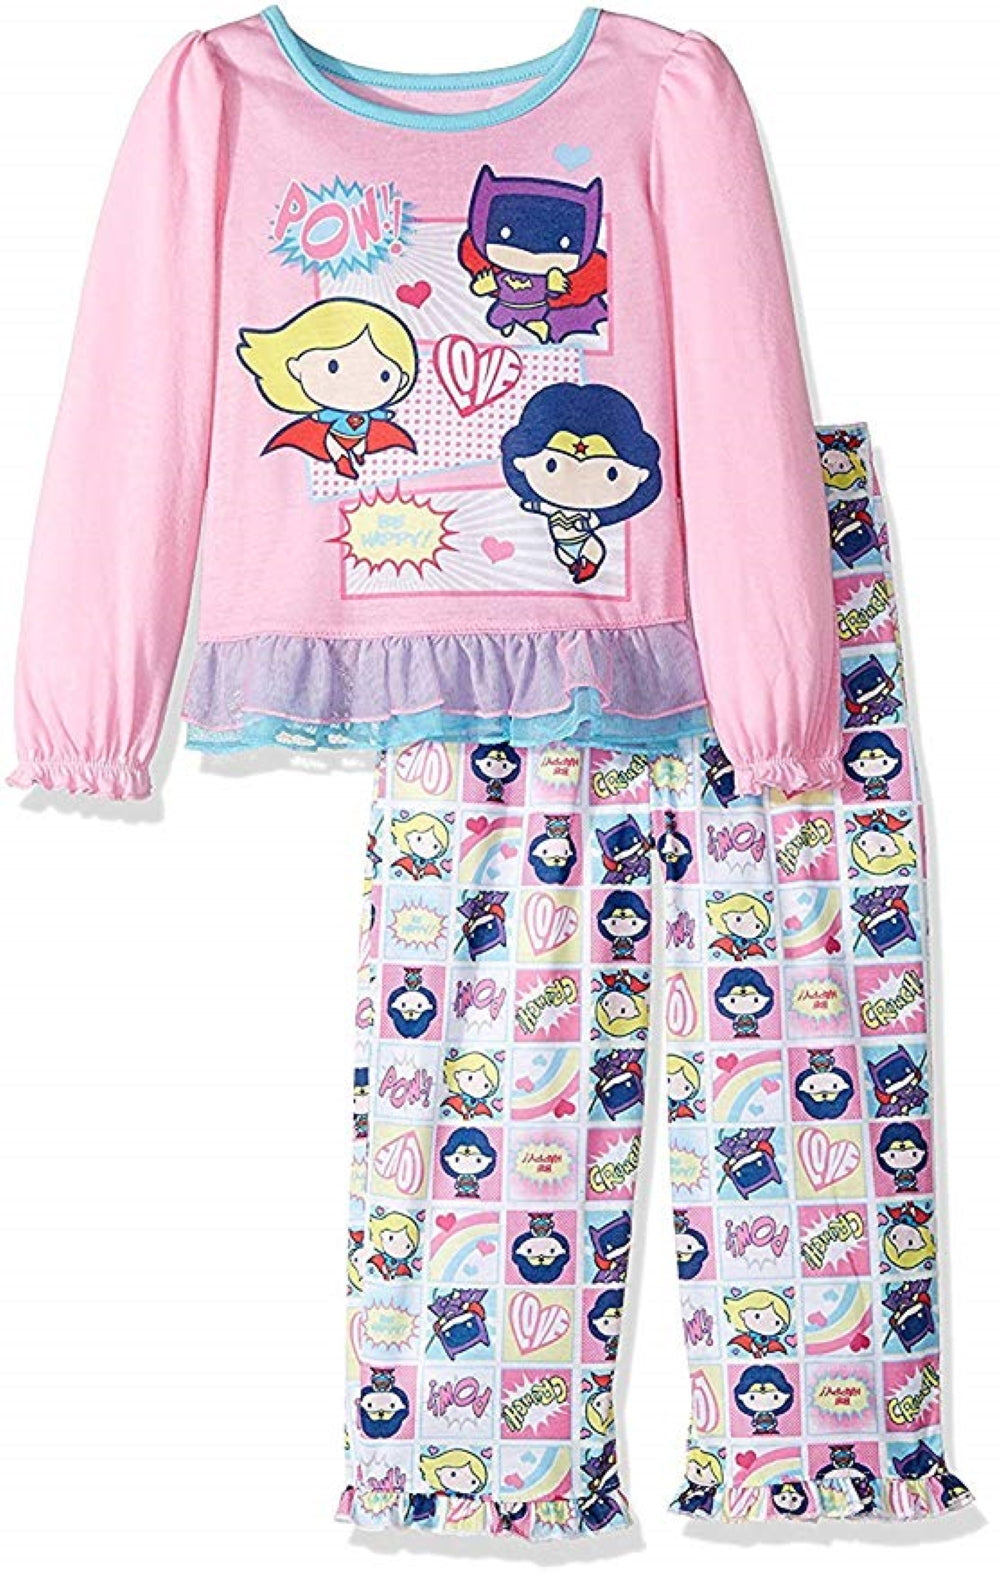 Justice League Toddler Girls Pajamas Set with Cape